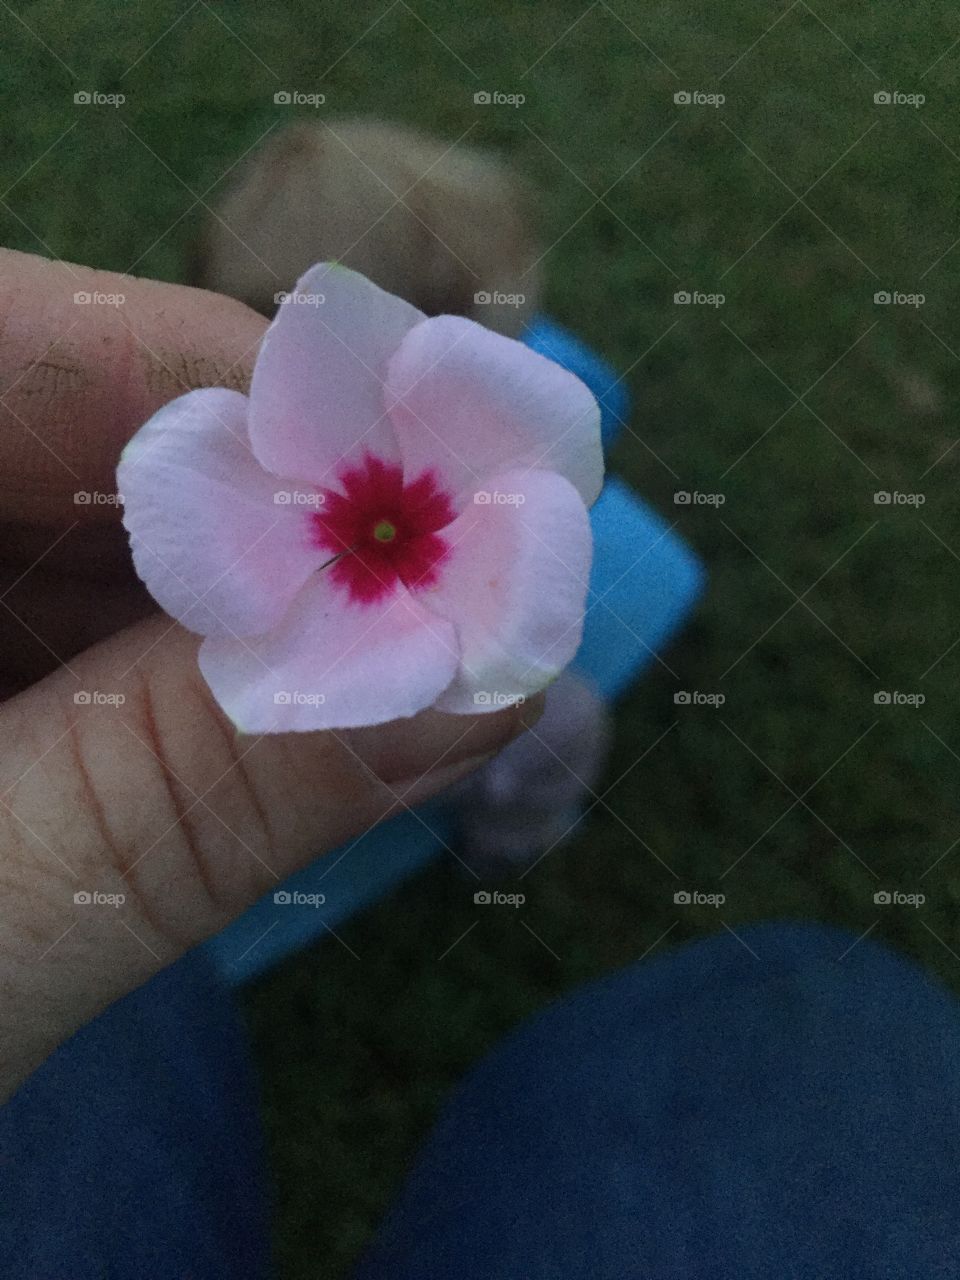 1” like pink flower with dark pink in the middle.